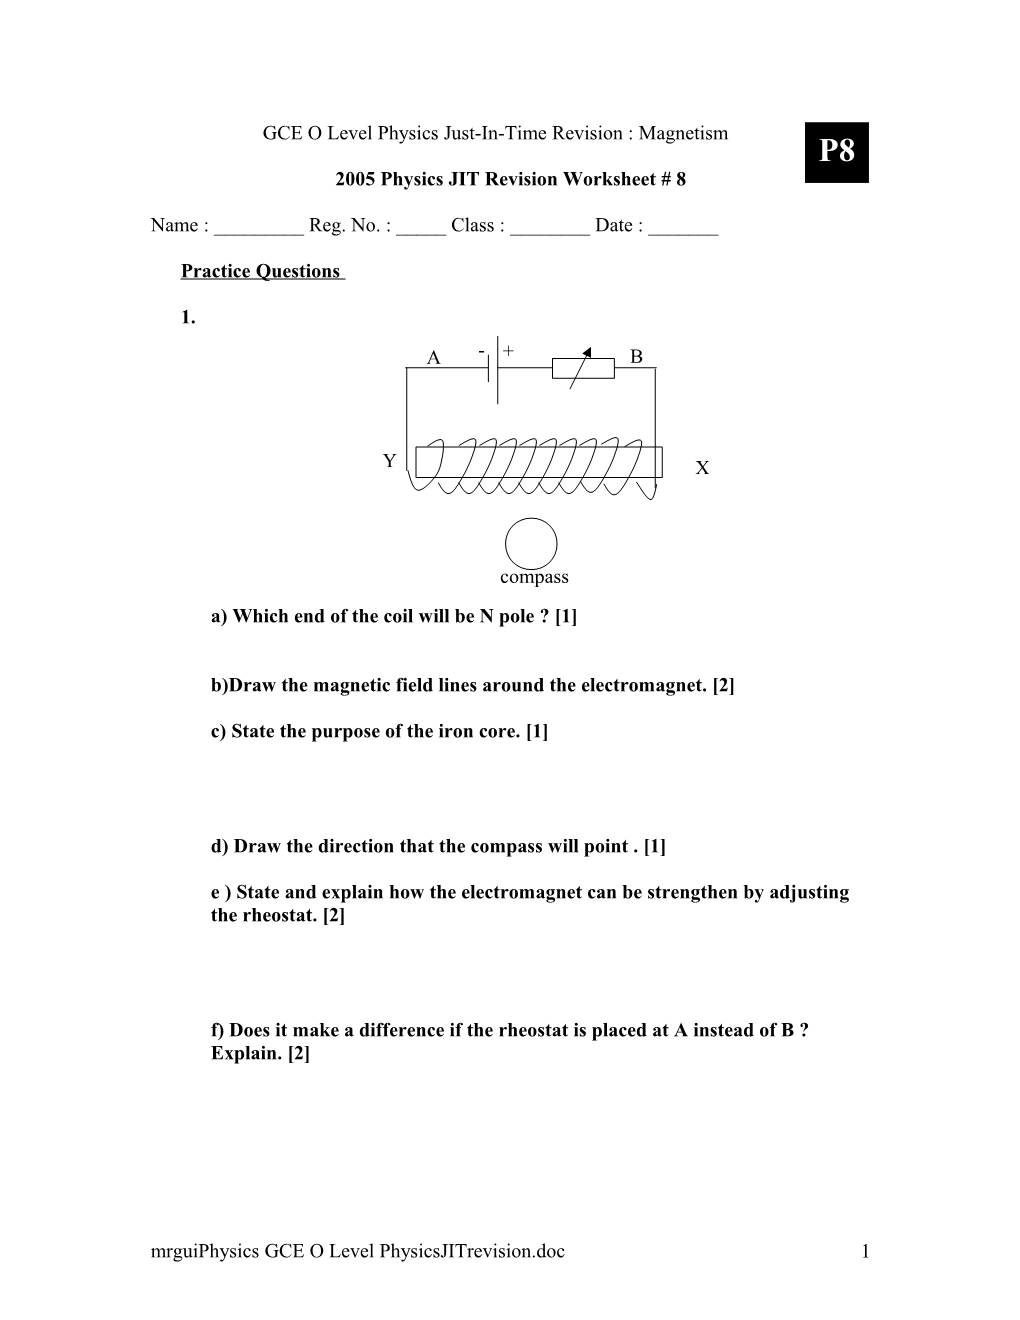 GCE O Level Physics Just-In-Time Revision : Electricity II